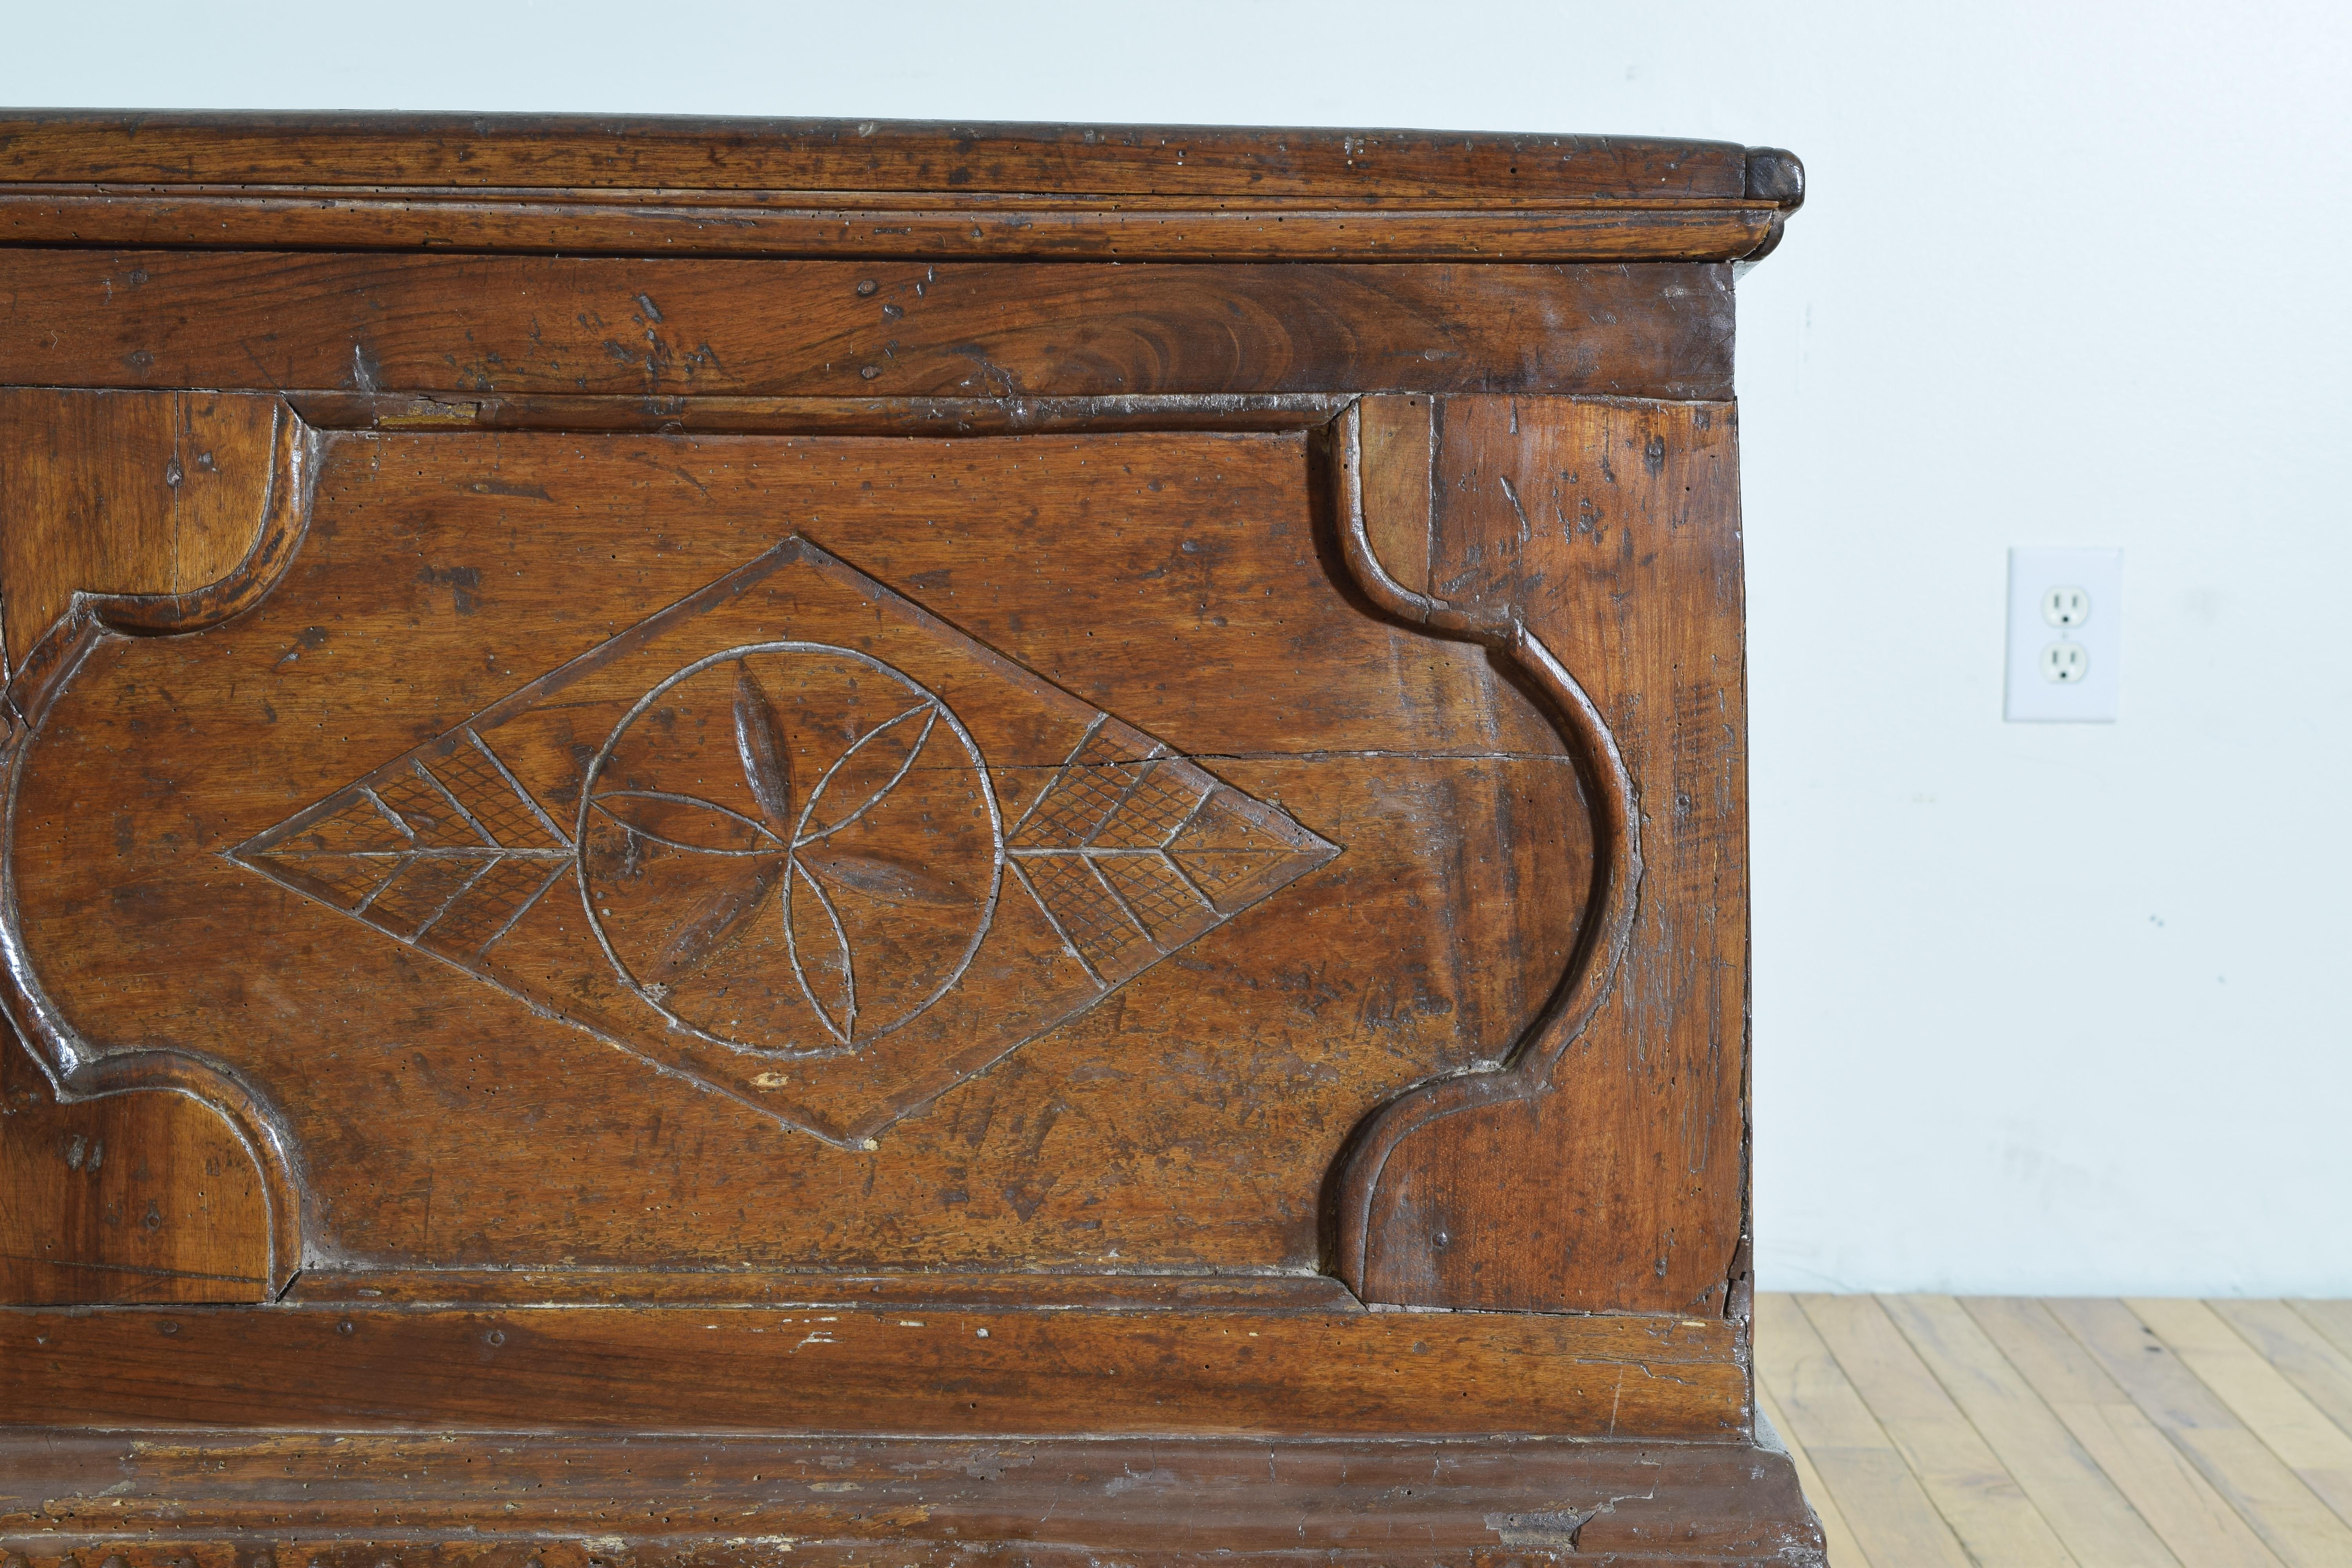 Italian / Southern Tyrolean Carved Walnut Paneled Cassapanca, mid 17th century For Sale 2